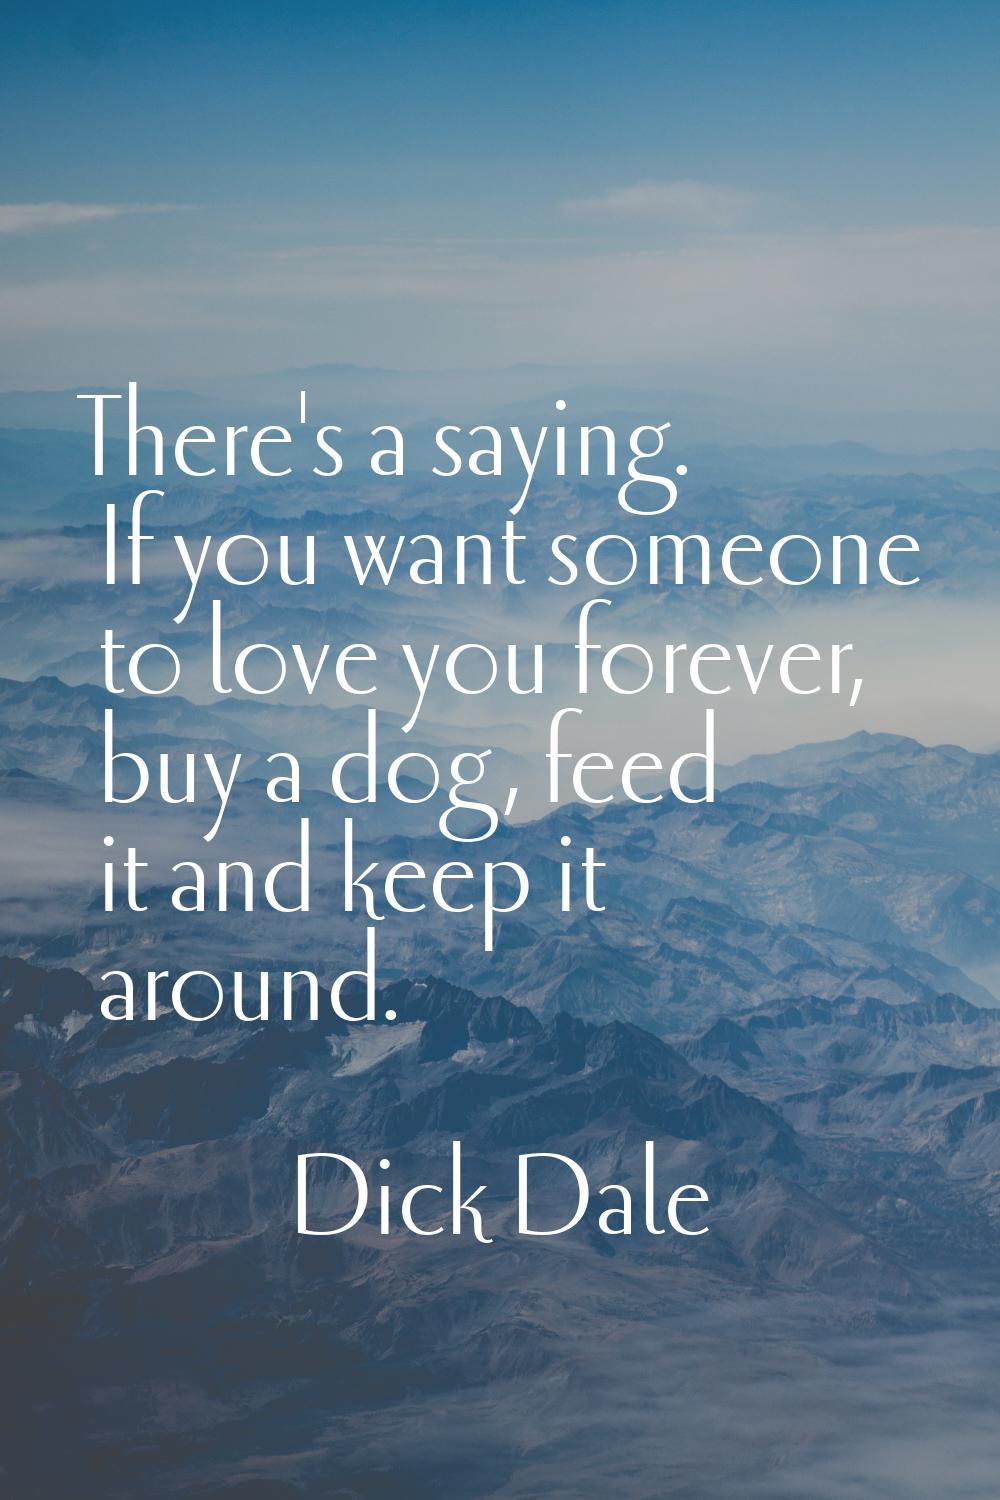 There's a saying. If you want someone to love you forever, buy a dog, feed it and keep it around.